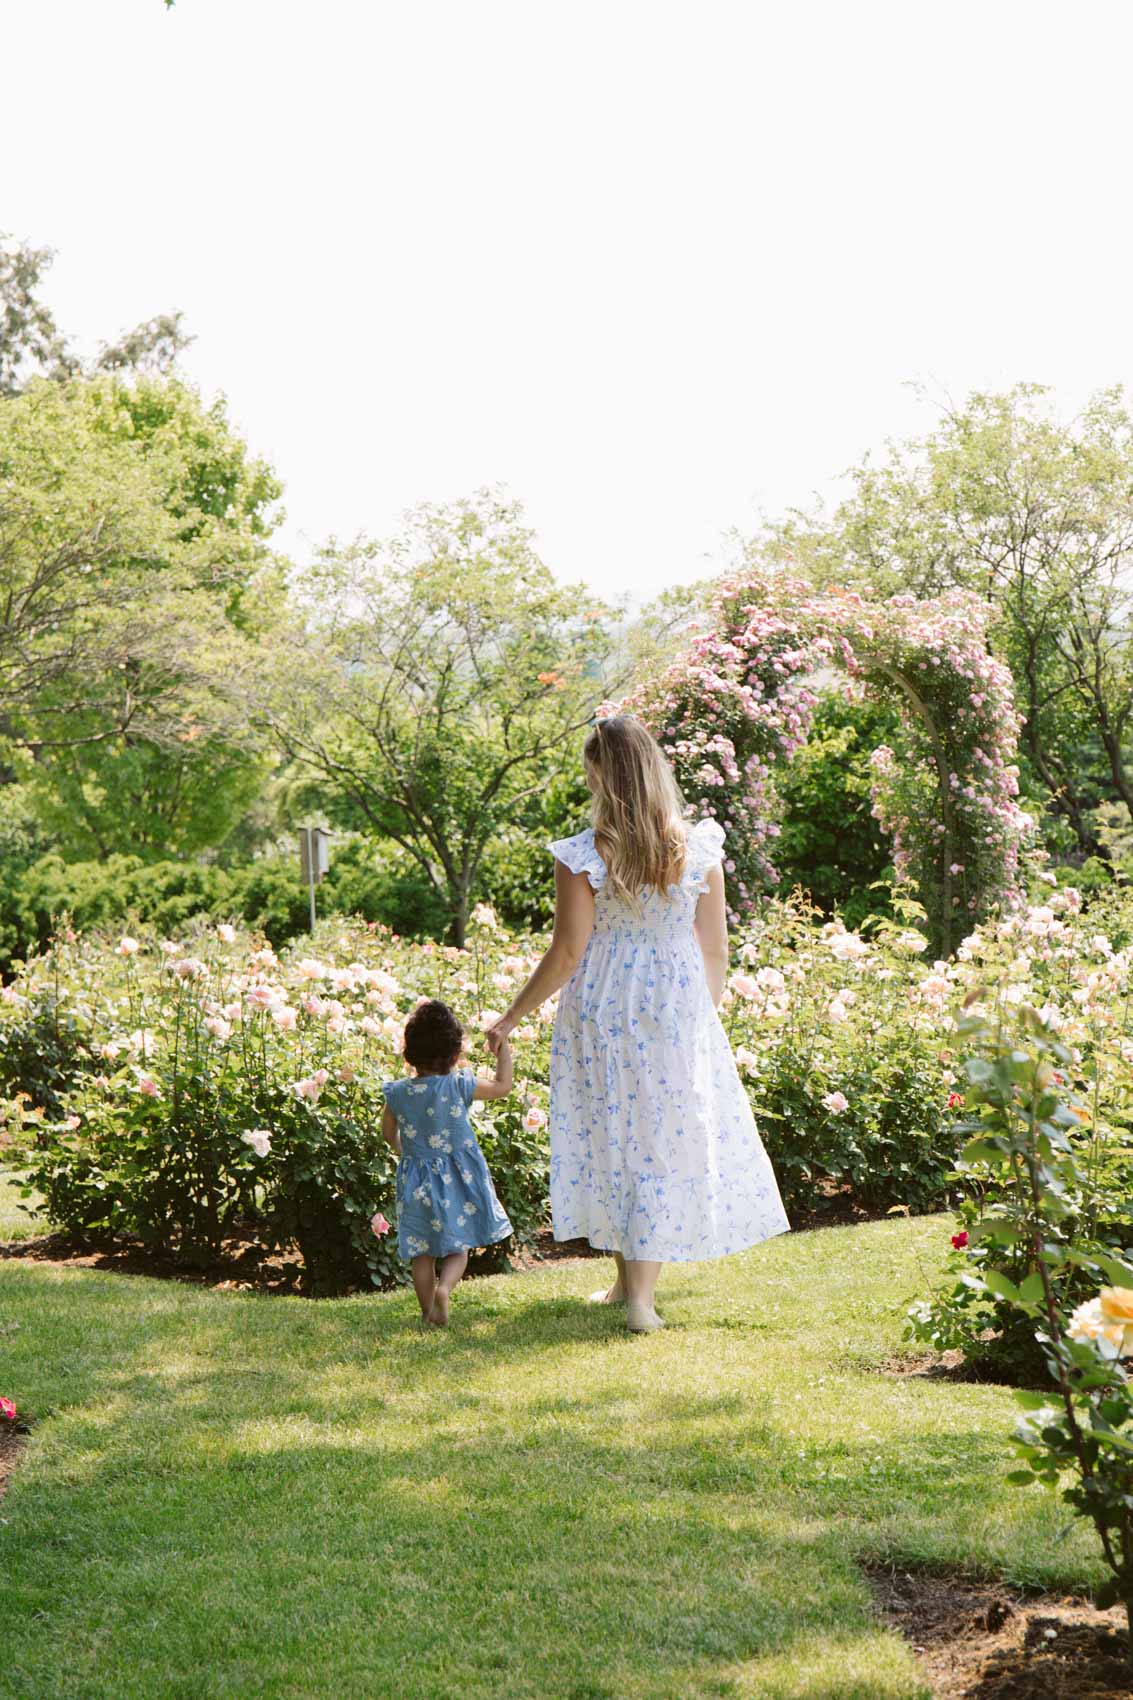 Exploring Hershey Gardens in the must-have Hill House Nap Dress. 